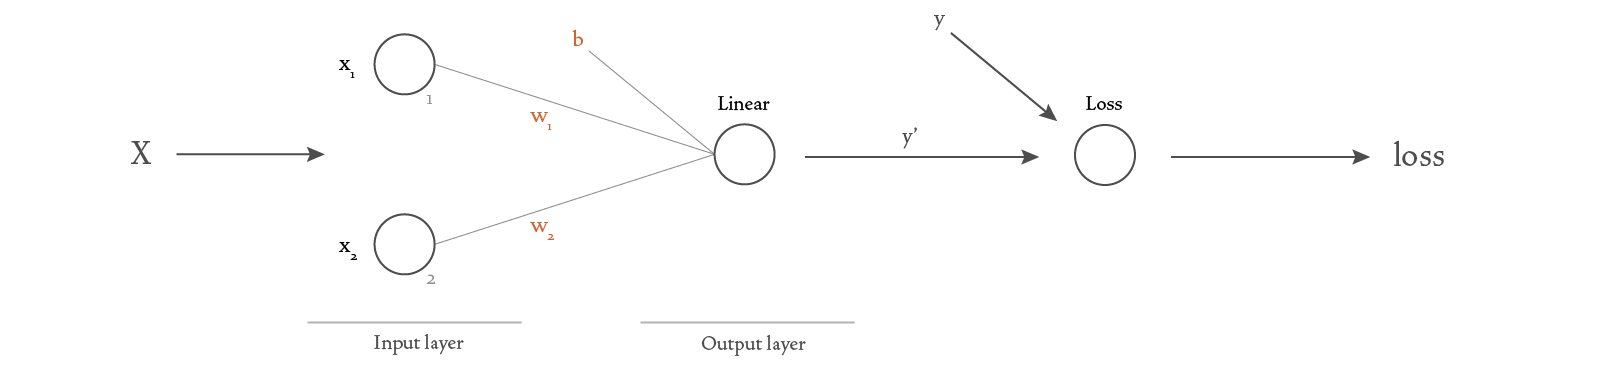 Diagram of a basic neural network with more detail.